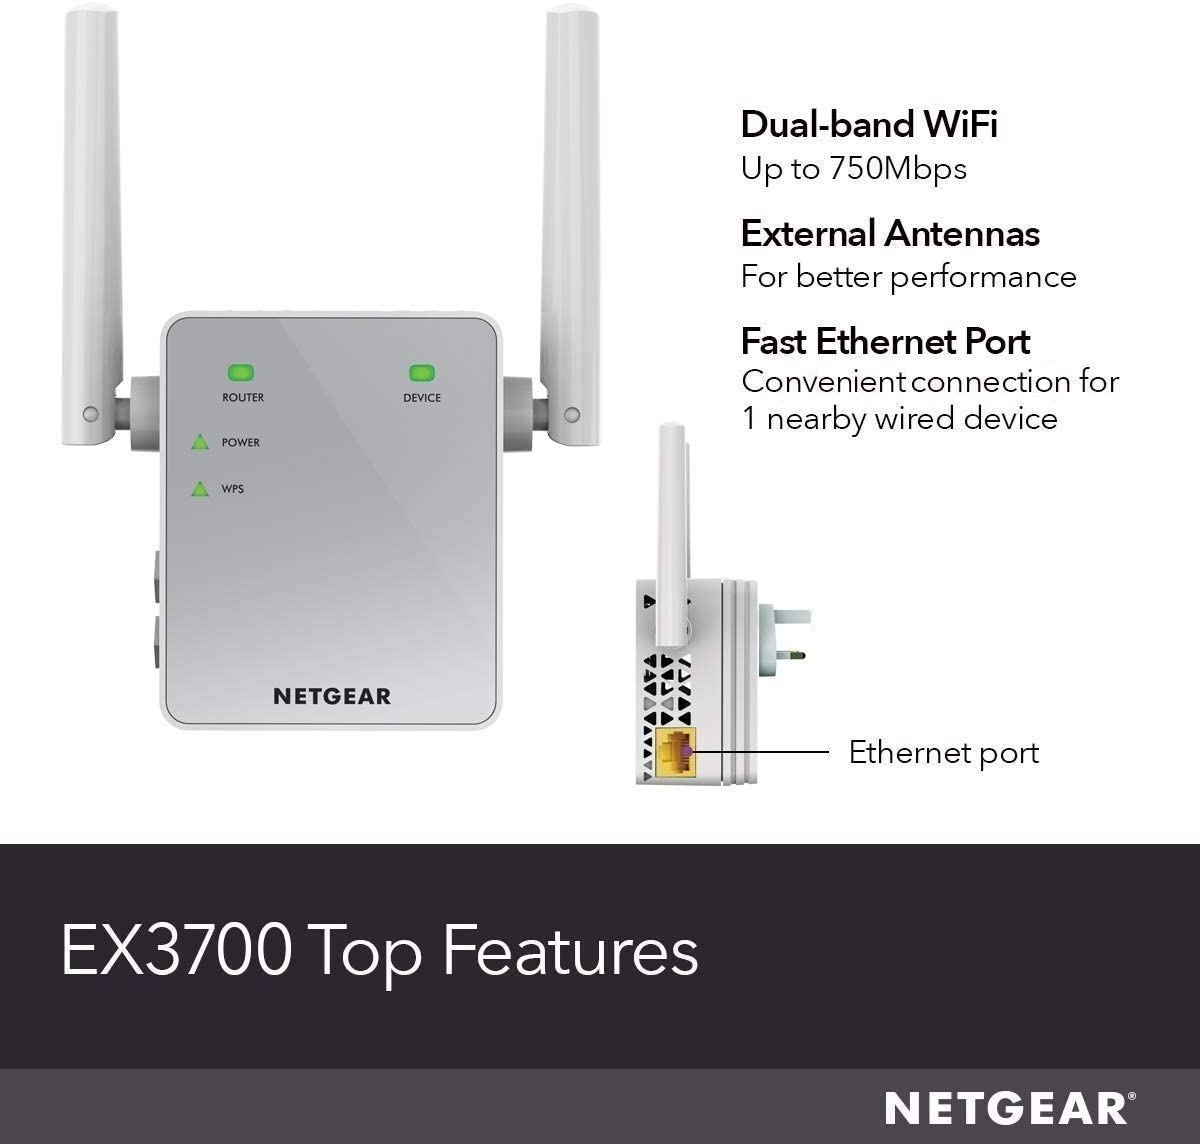 NETGEAR WiFi Booster Range Extender - Covers up to 1000 sq ft and 15 Devices with AC750 Dual Band Wireless Signal Repeater (up to 750 Mbps) and Compact Wall Plug Design with UK Plug (EX3700) WP Smart Home